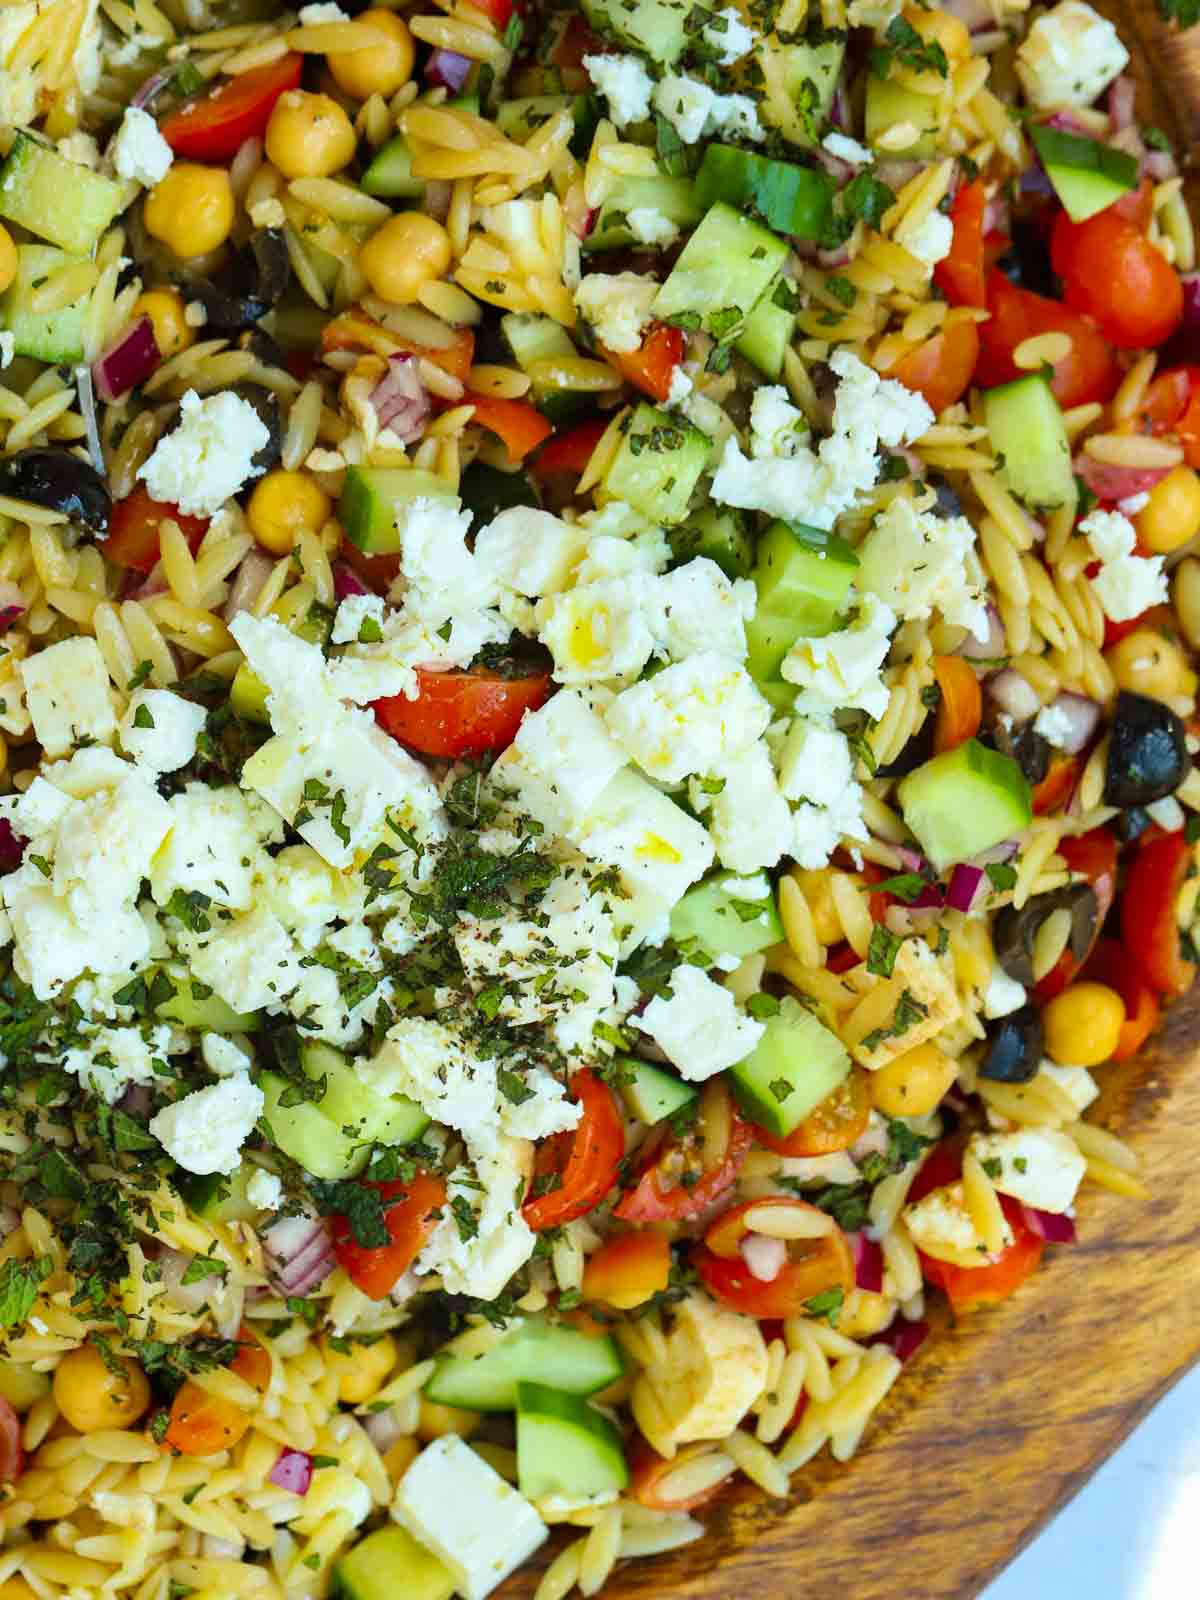 A big bowl filled with finely sliced ingredients that make up an Orzo Pasta Salad.